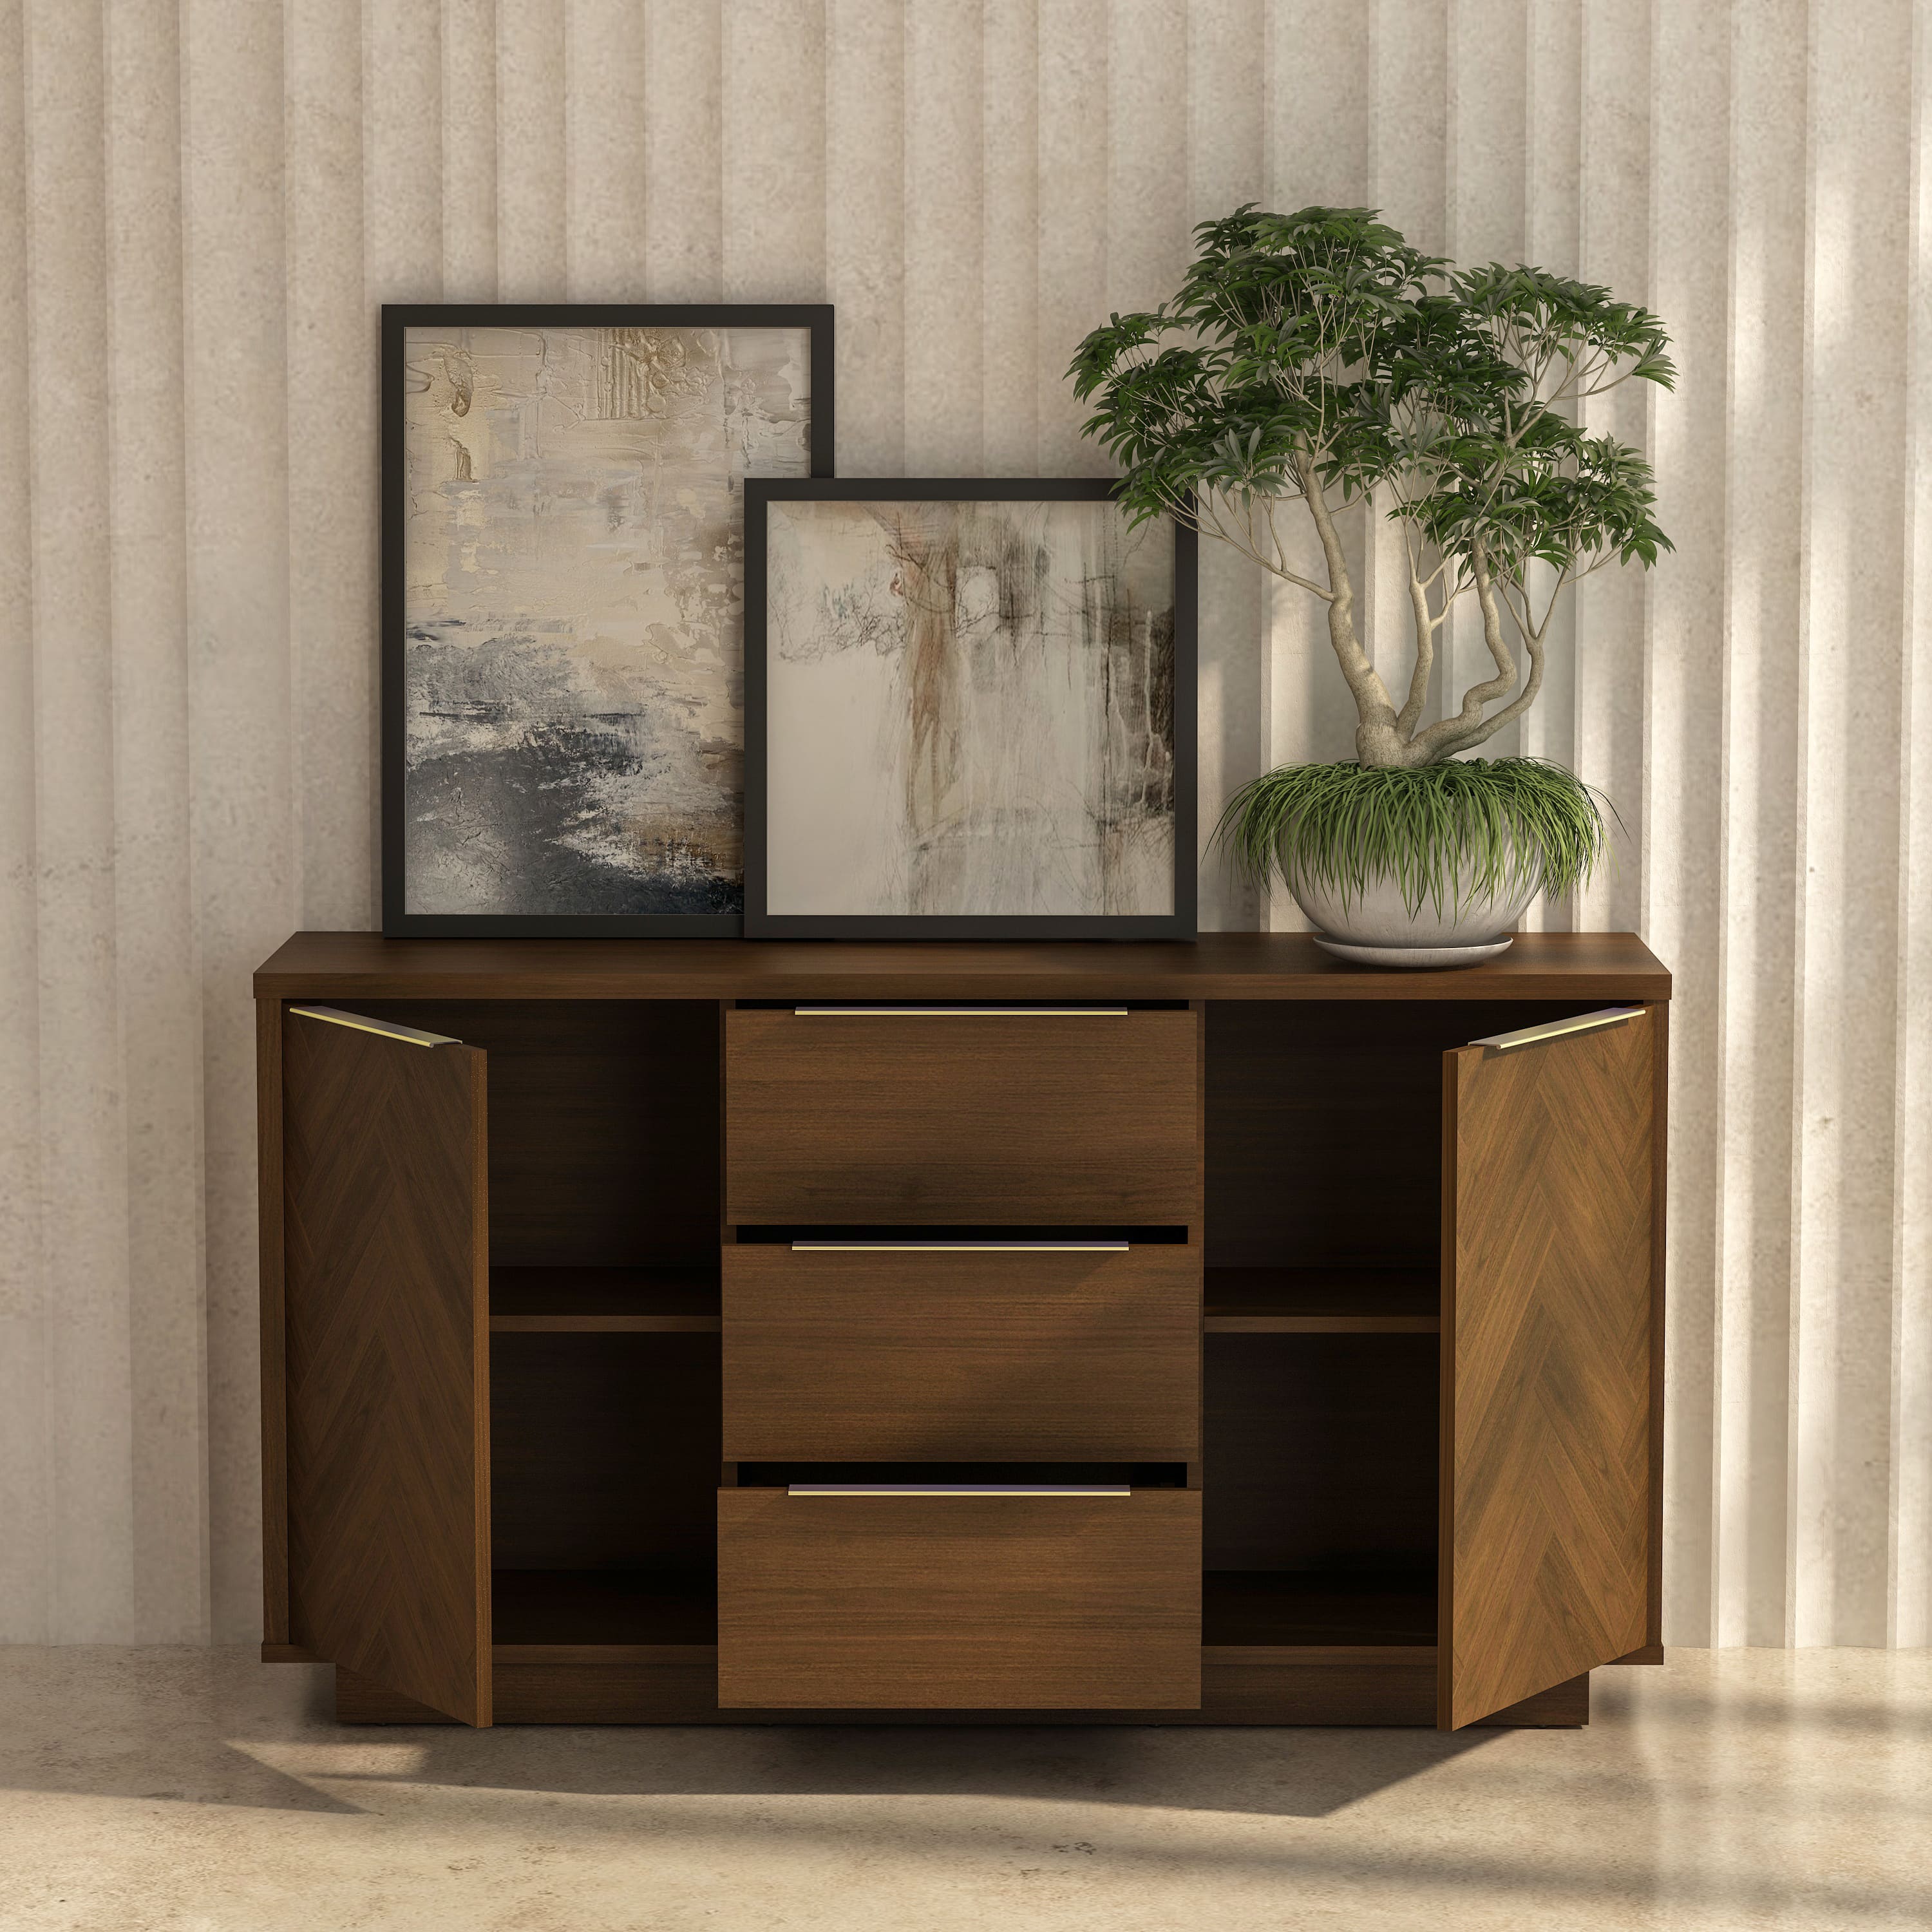 Anderson teak credenza with cabinets